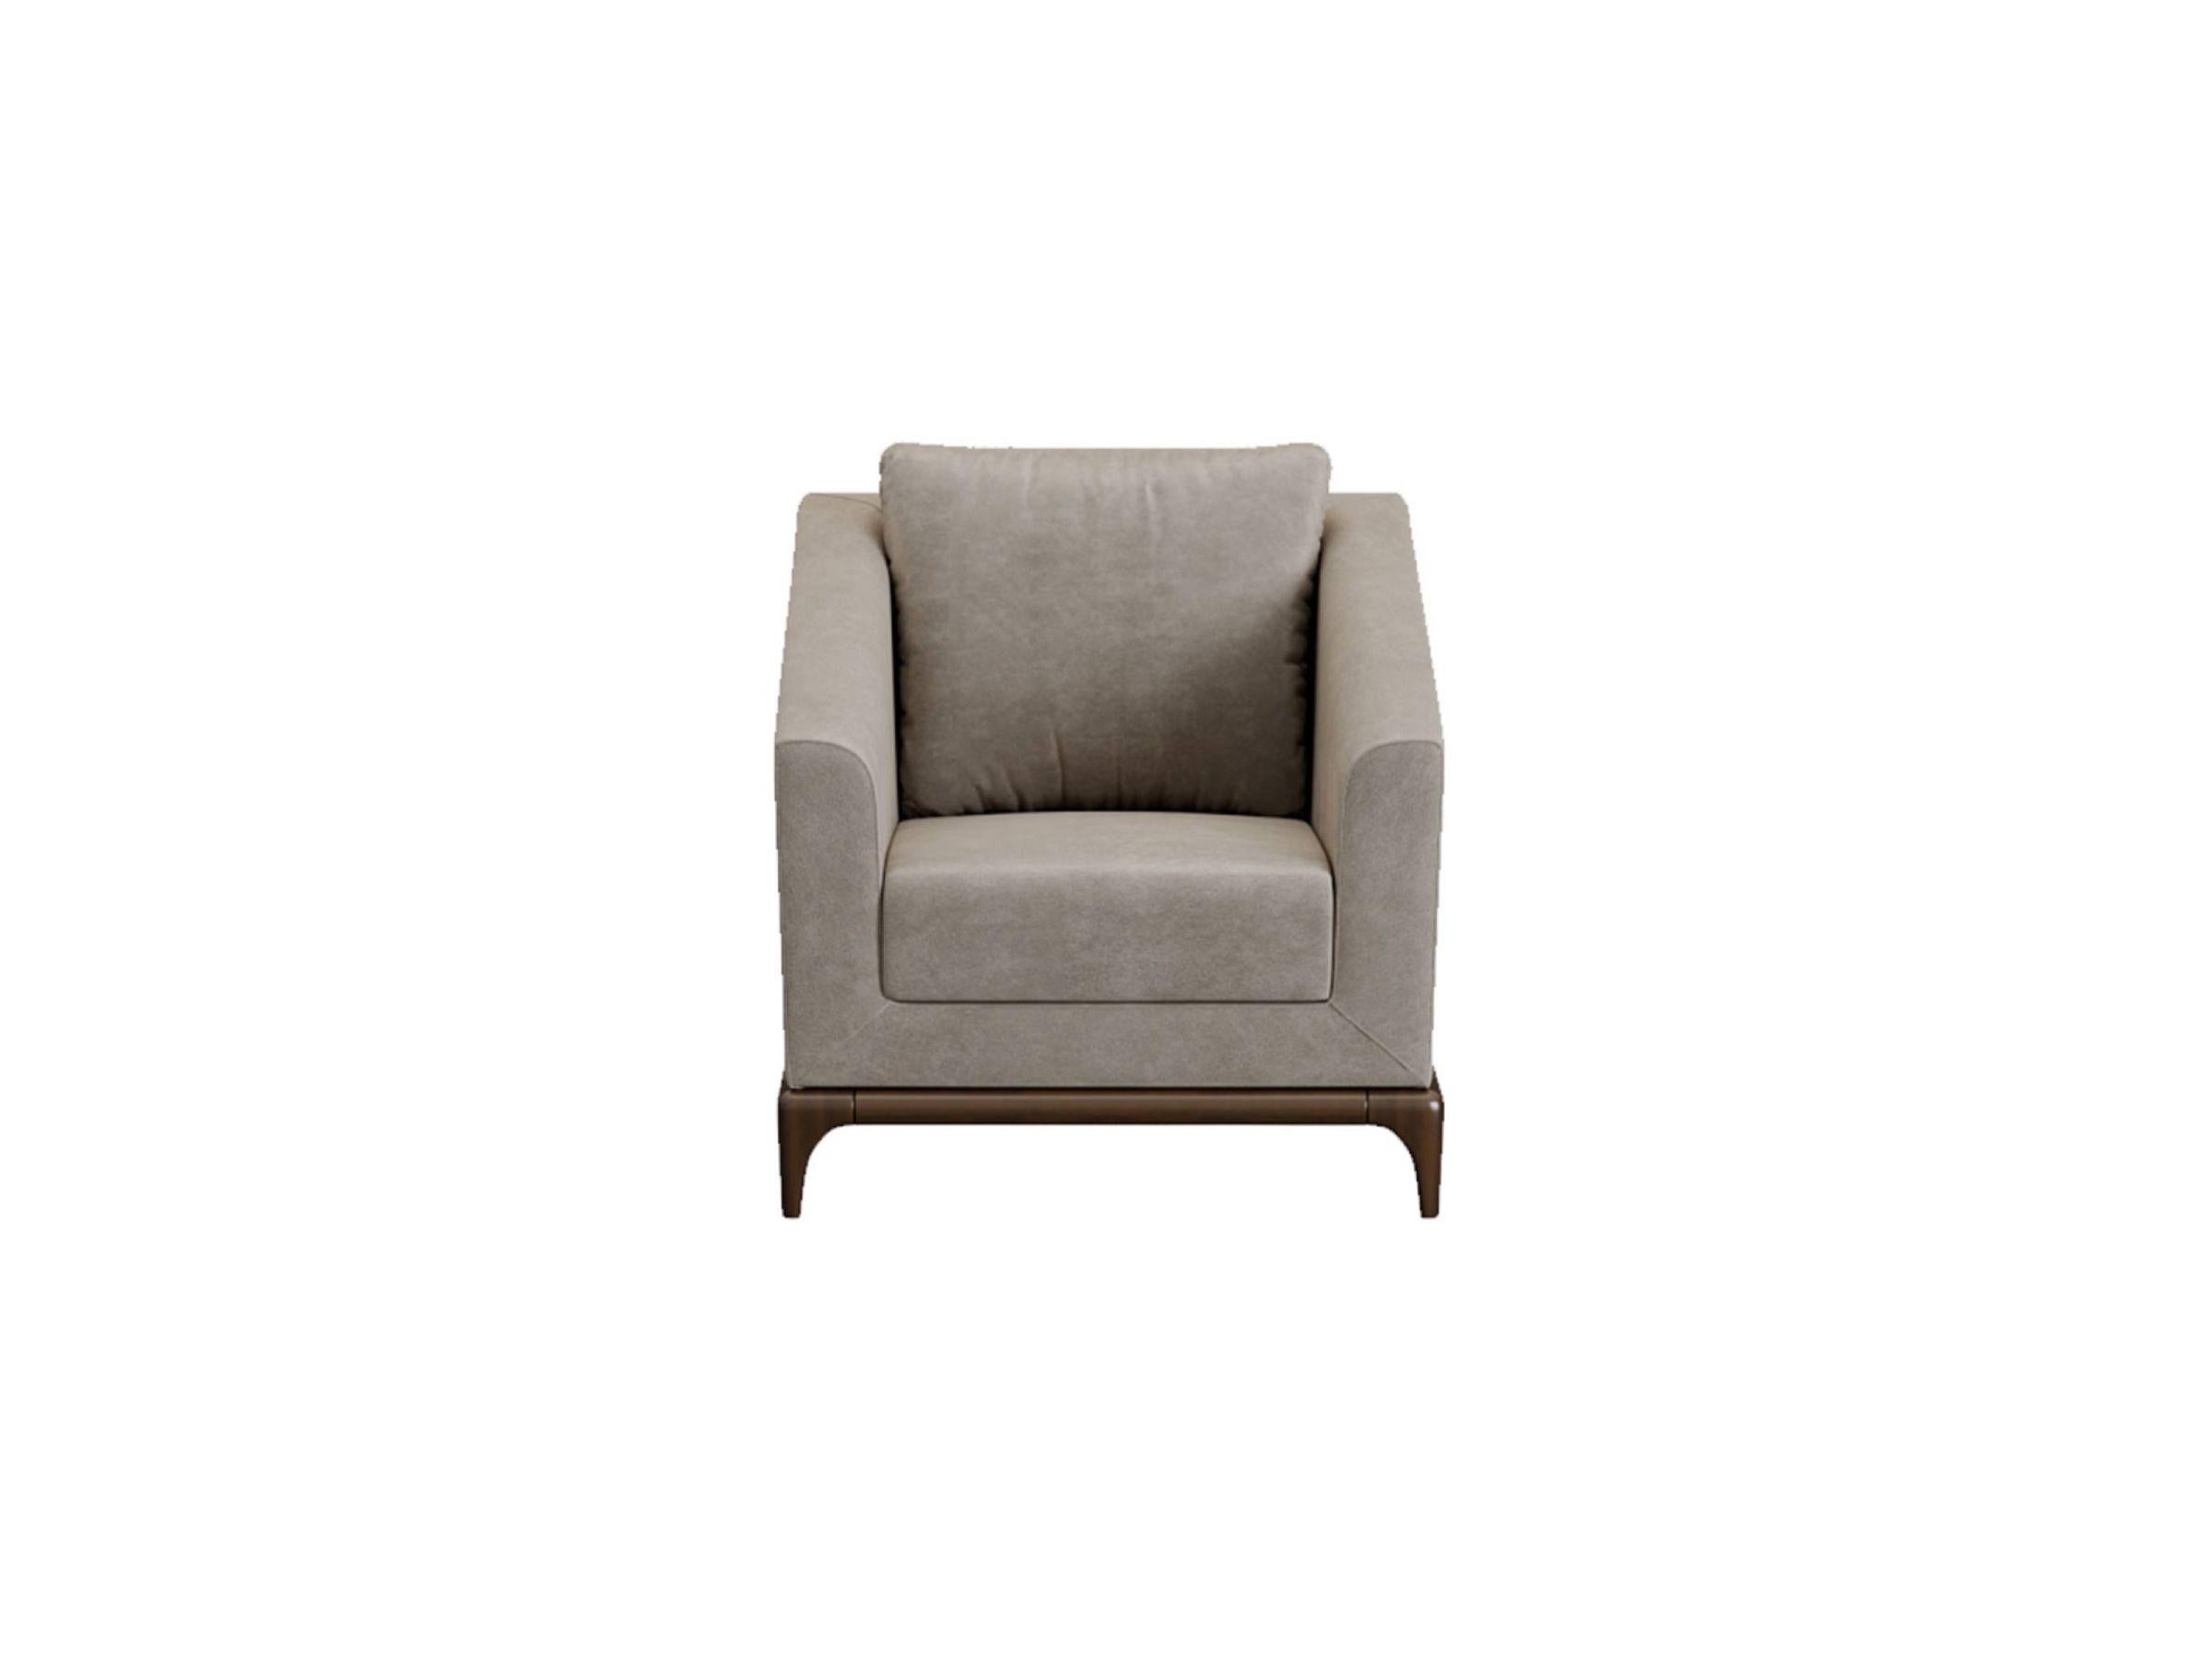 The Ada Armchair is the premium choice for those whose priority is comfort. Its elegant-modern structure creates a unique style that easily integrates into any living area. As being one of the first choices of people prioritizes comfort, the special